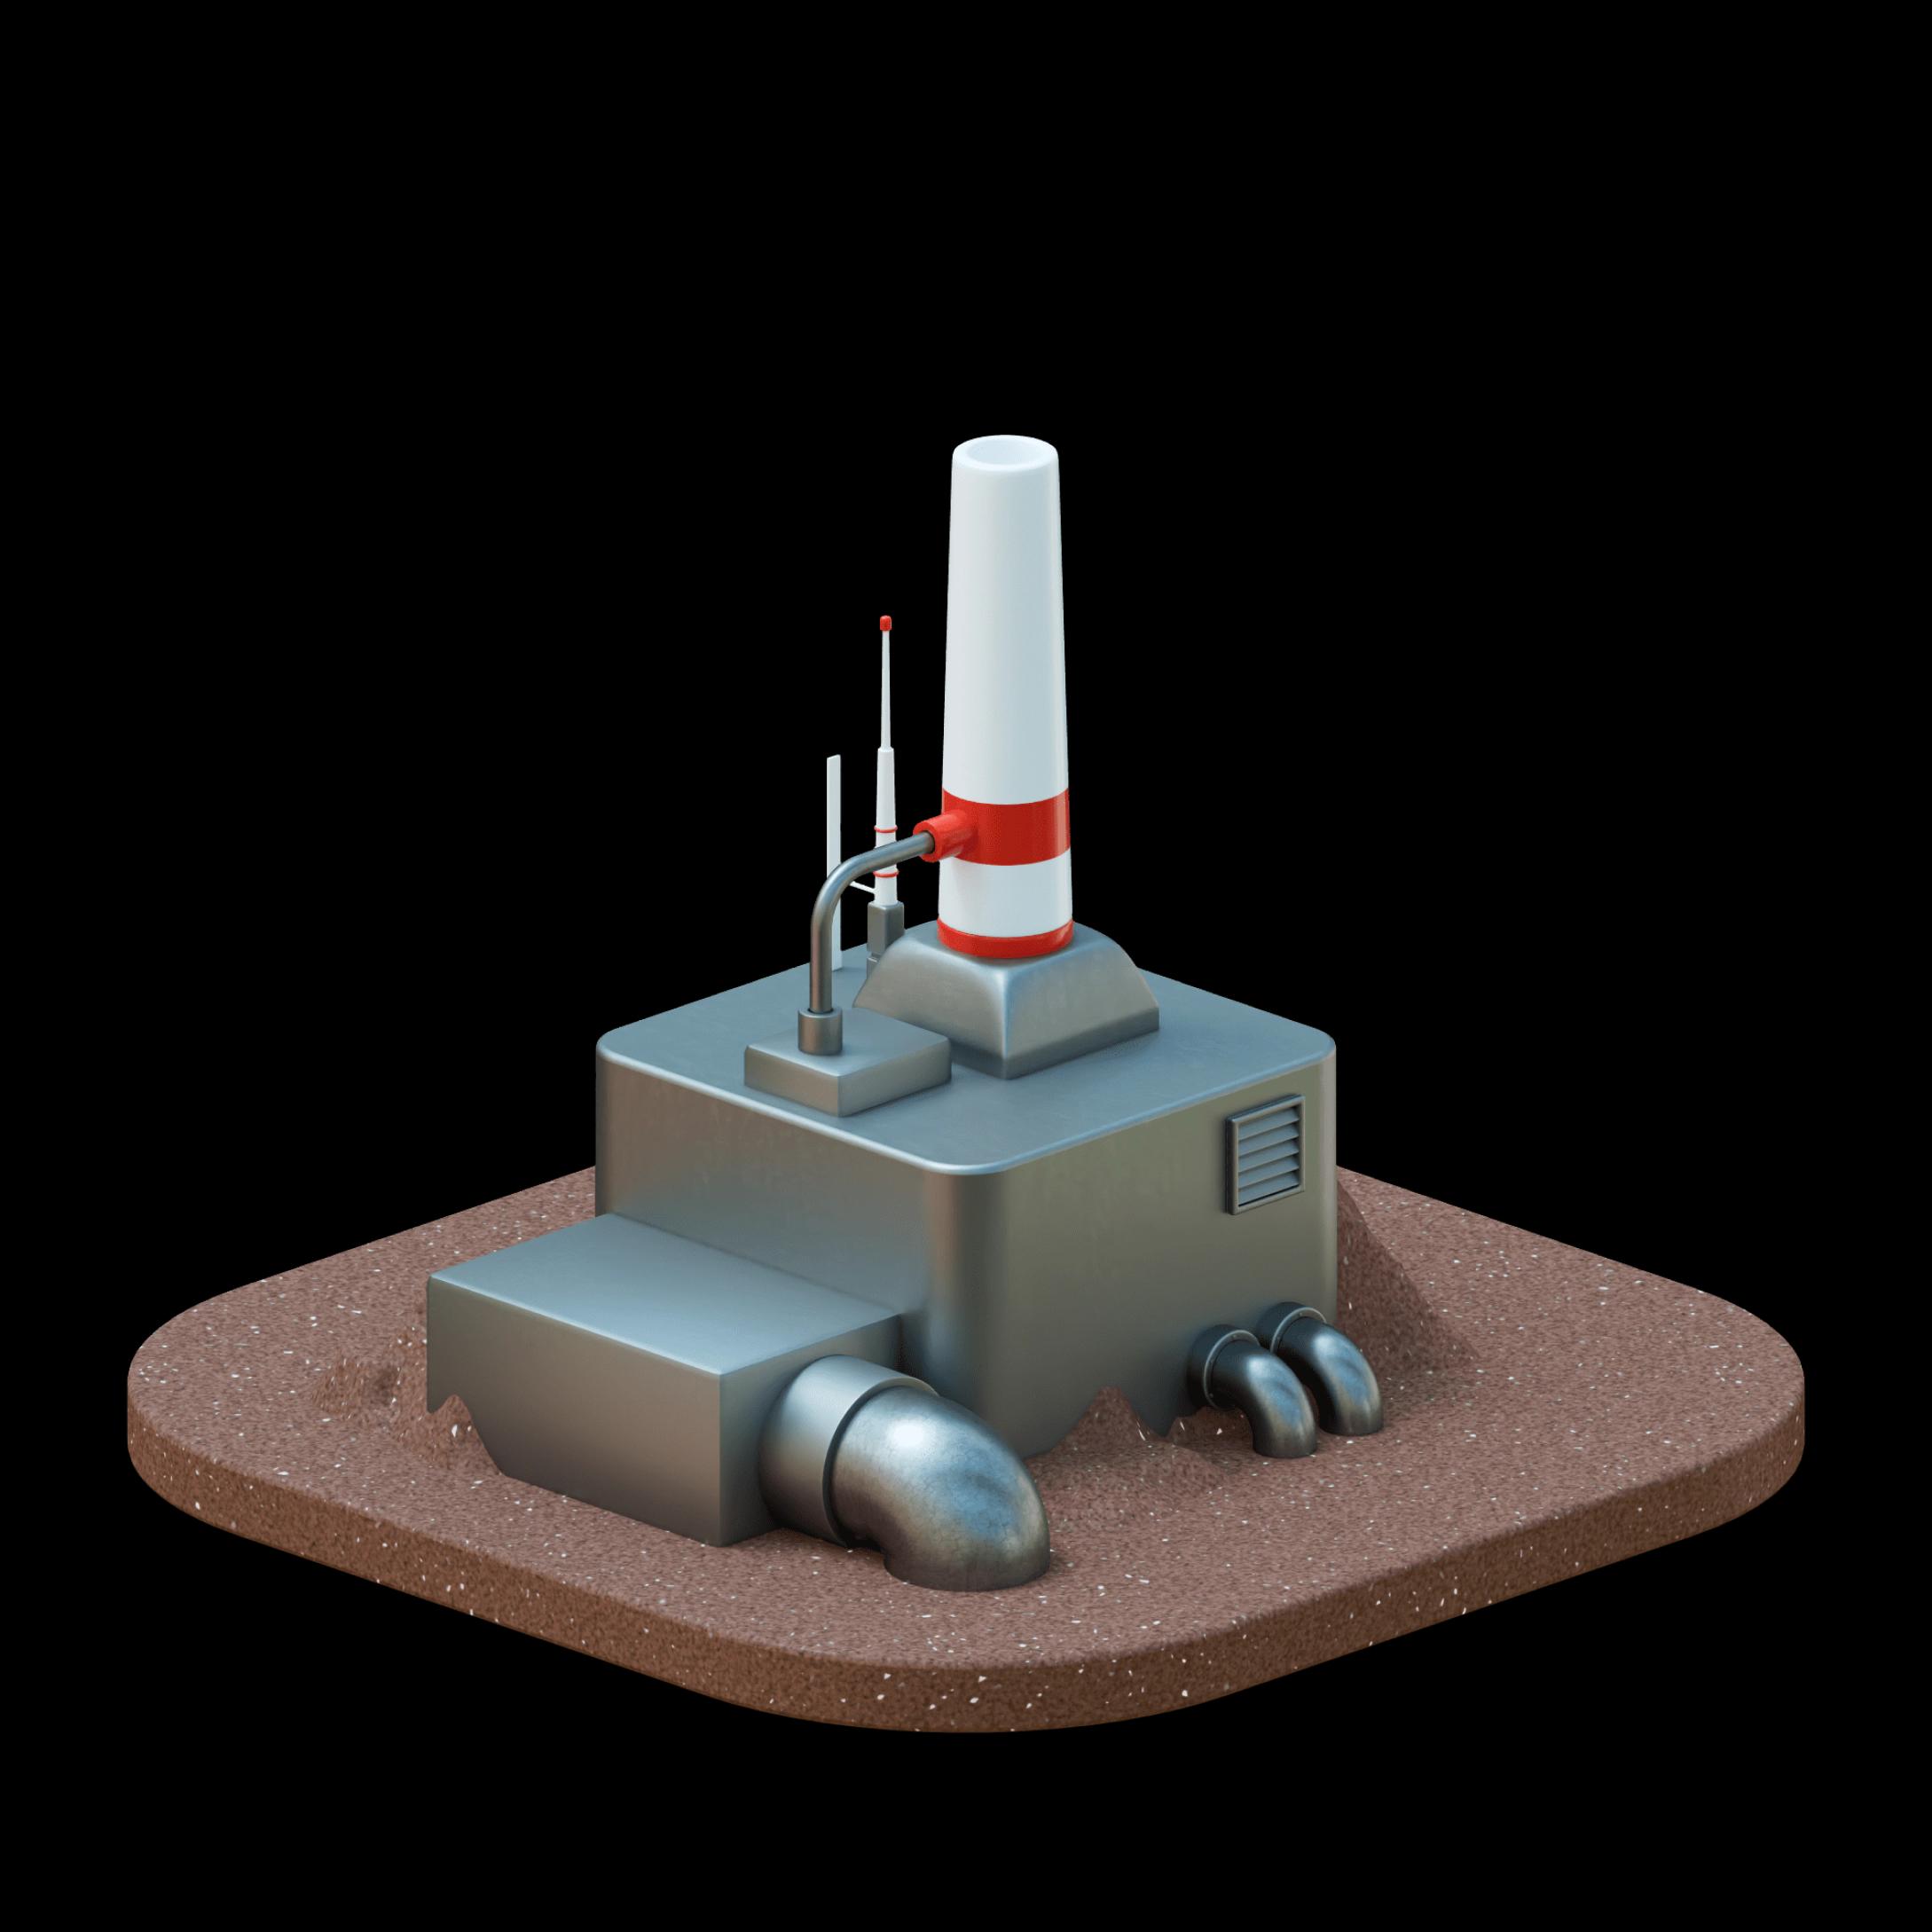 A small 3d model of a geothermal power plant facility with steam turbines